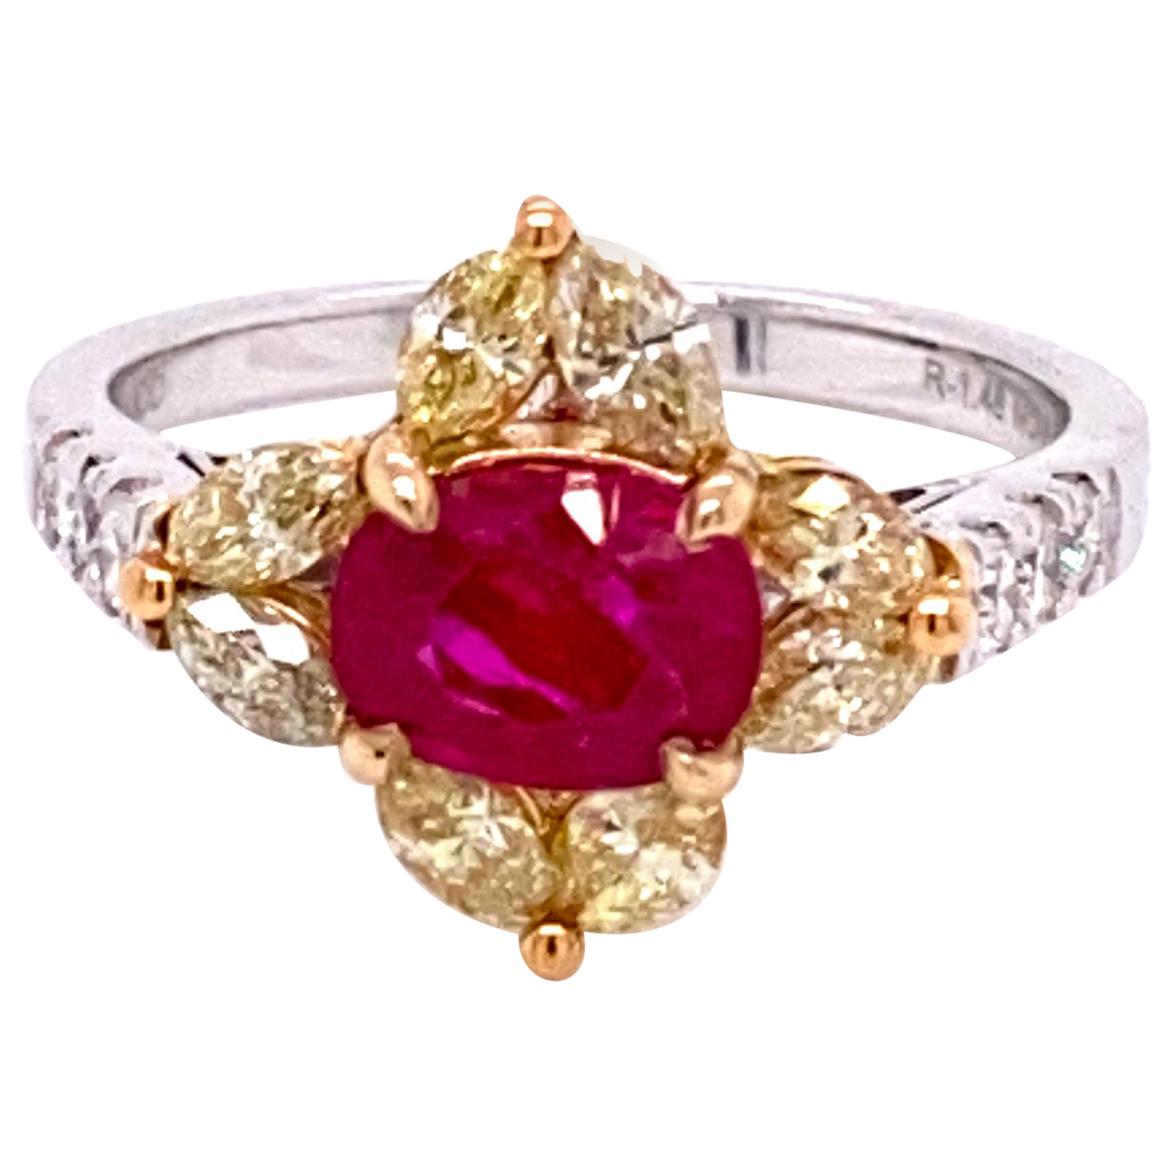 1.48 Carat GRS Certified No Heat Pigeon's Blood Red Burma Ruby and Diamond Ring:

A beautiful and rare ring, it features an exquisite GRS Lab certified no heat pigeon's blood red Burmese ruby weighing 1.48 carat with a flowery halo of fancy yellow